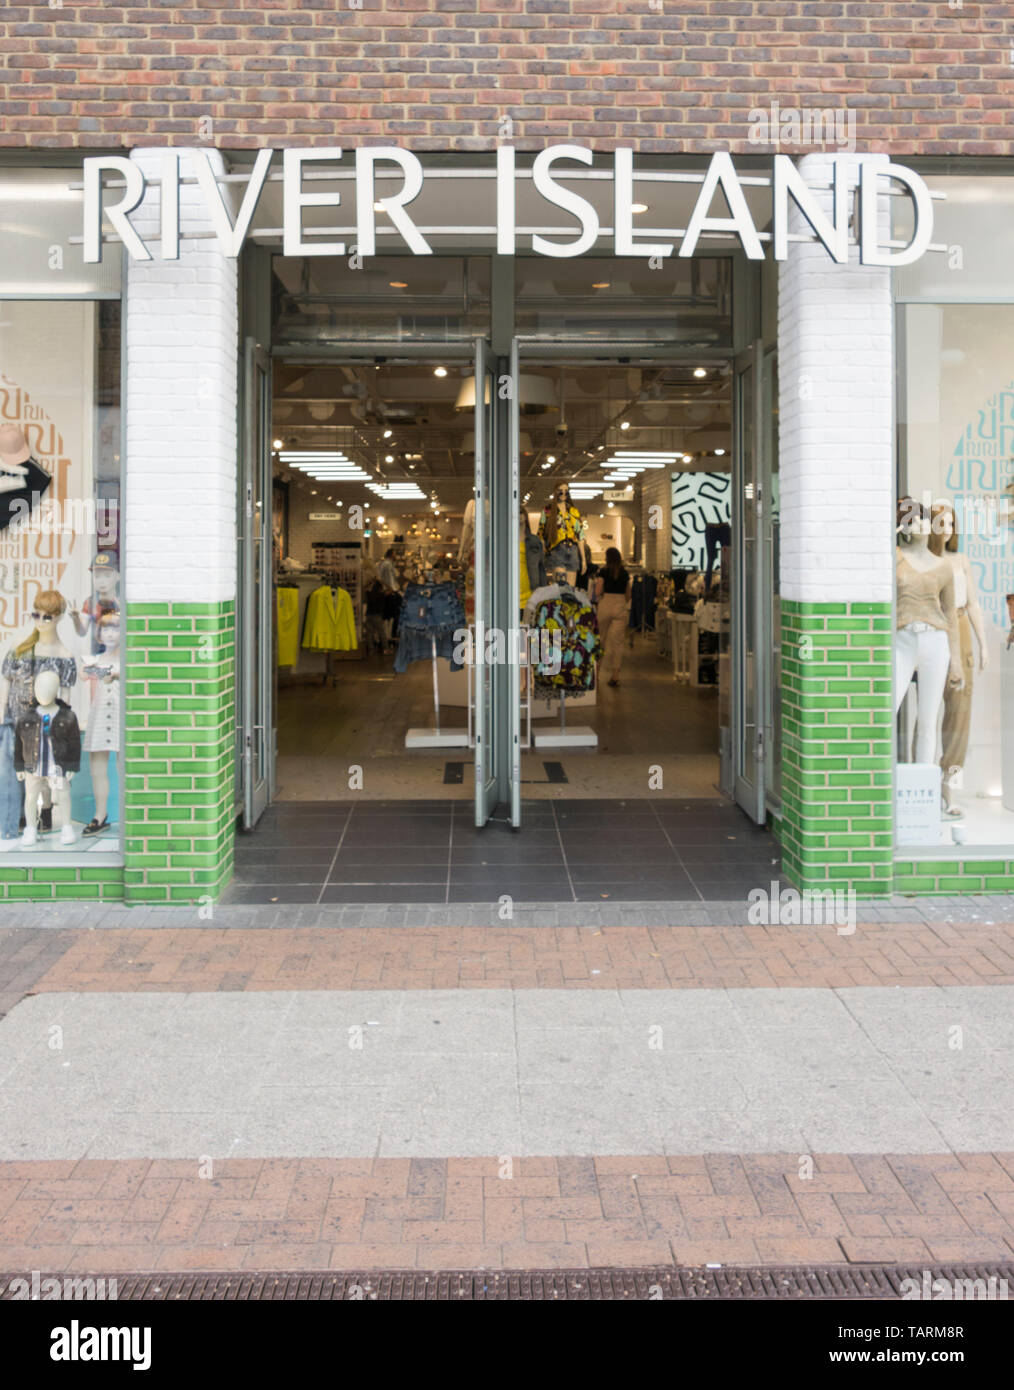 River Island shop front in Kingston, Surrey, UK Stock Photo